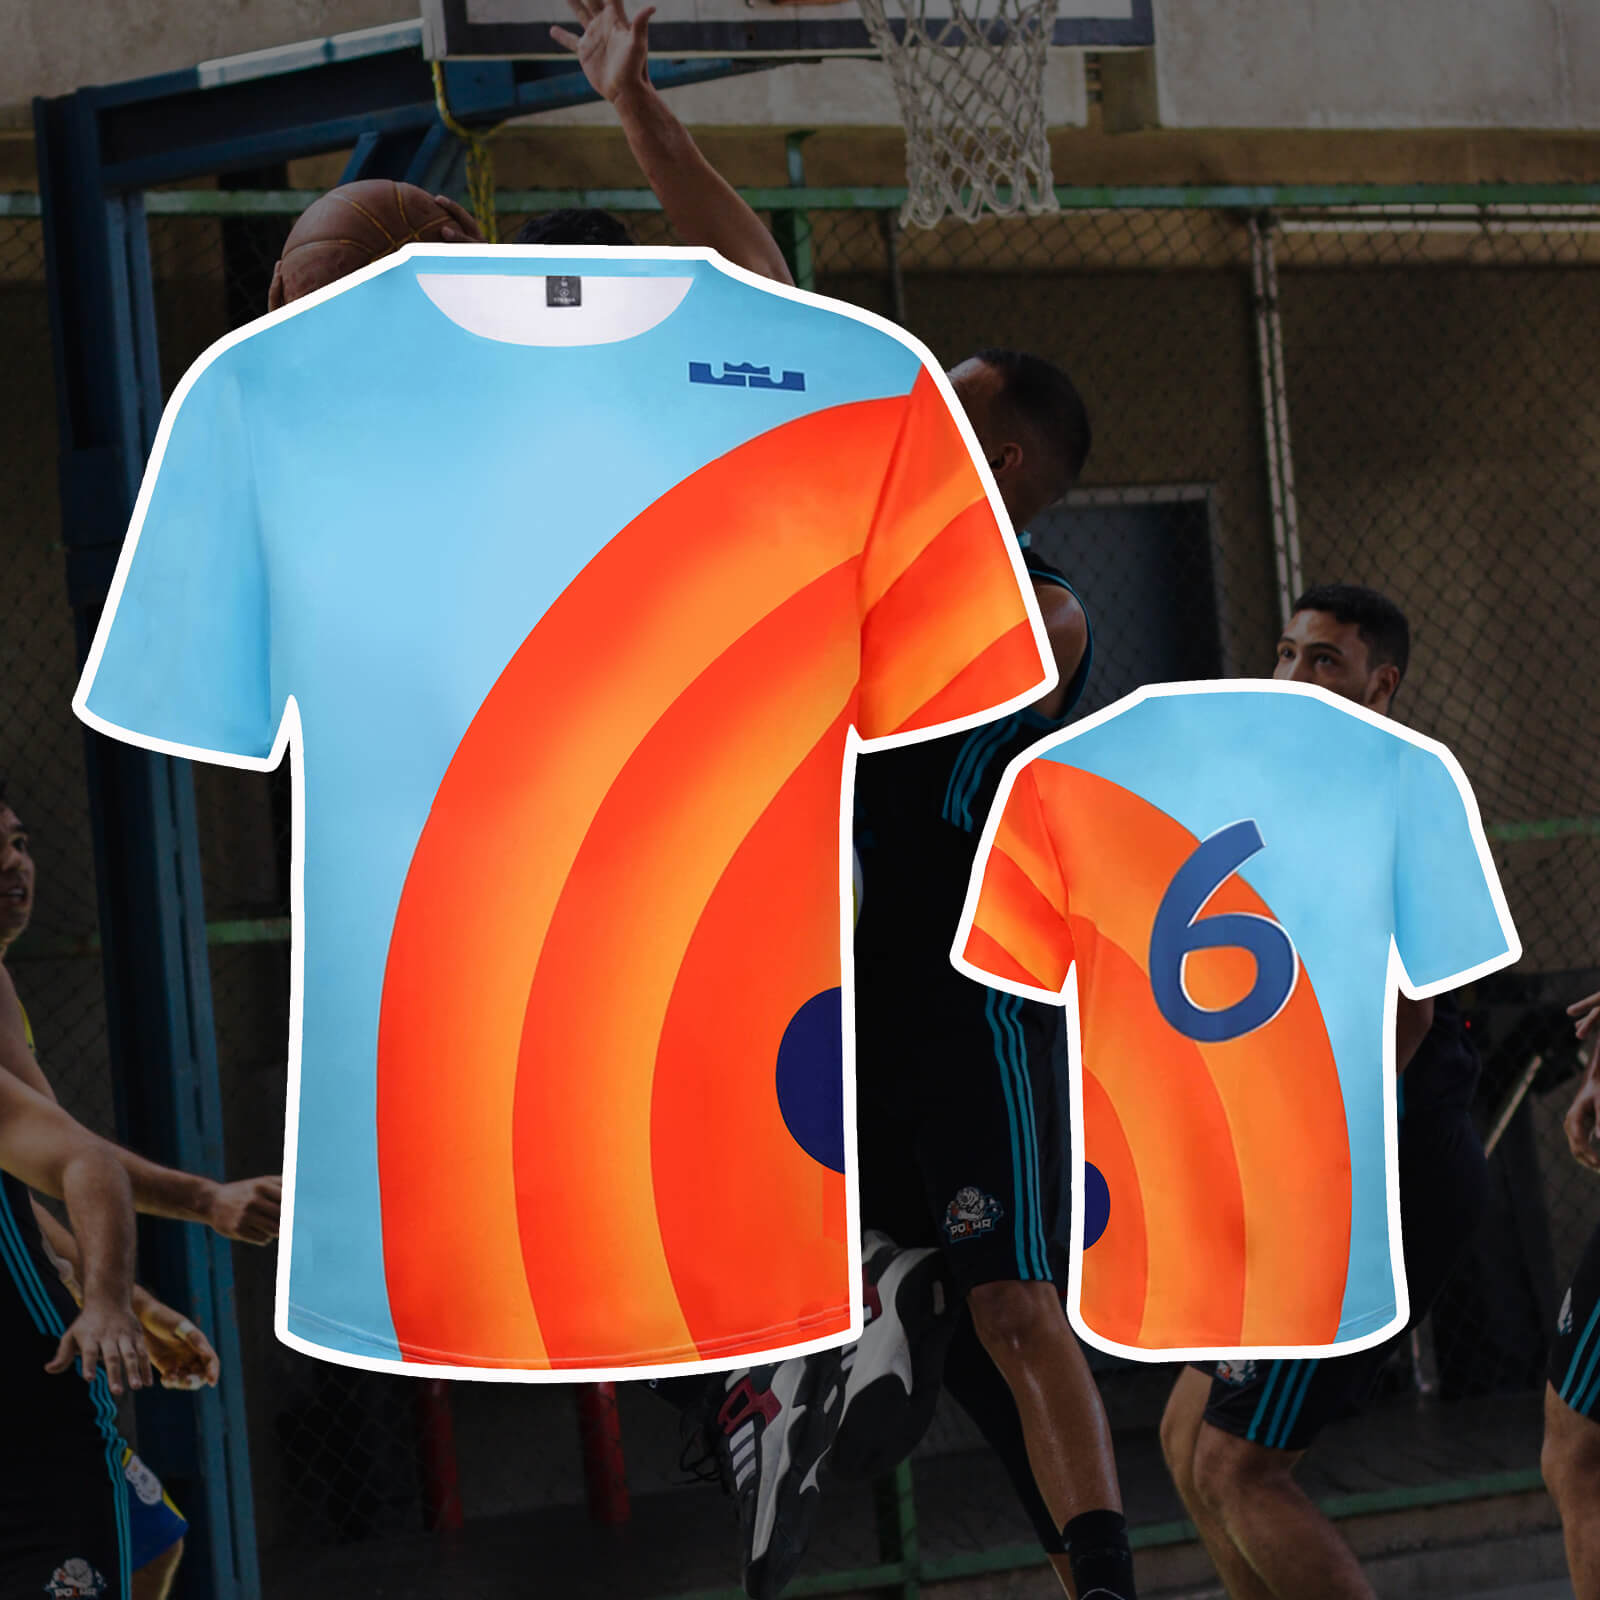 New #6 Basketball T-shirt and Shorts Fashion Tees Sportswear for Youths and Adults